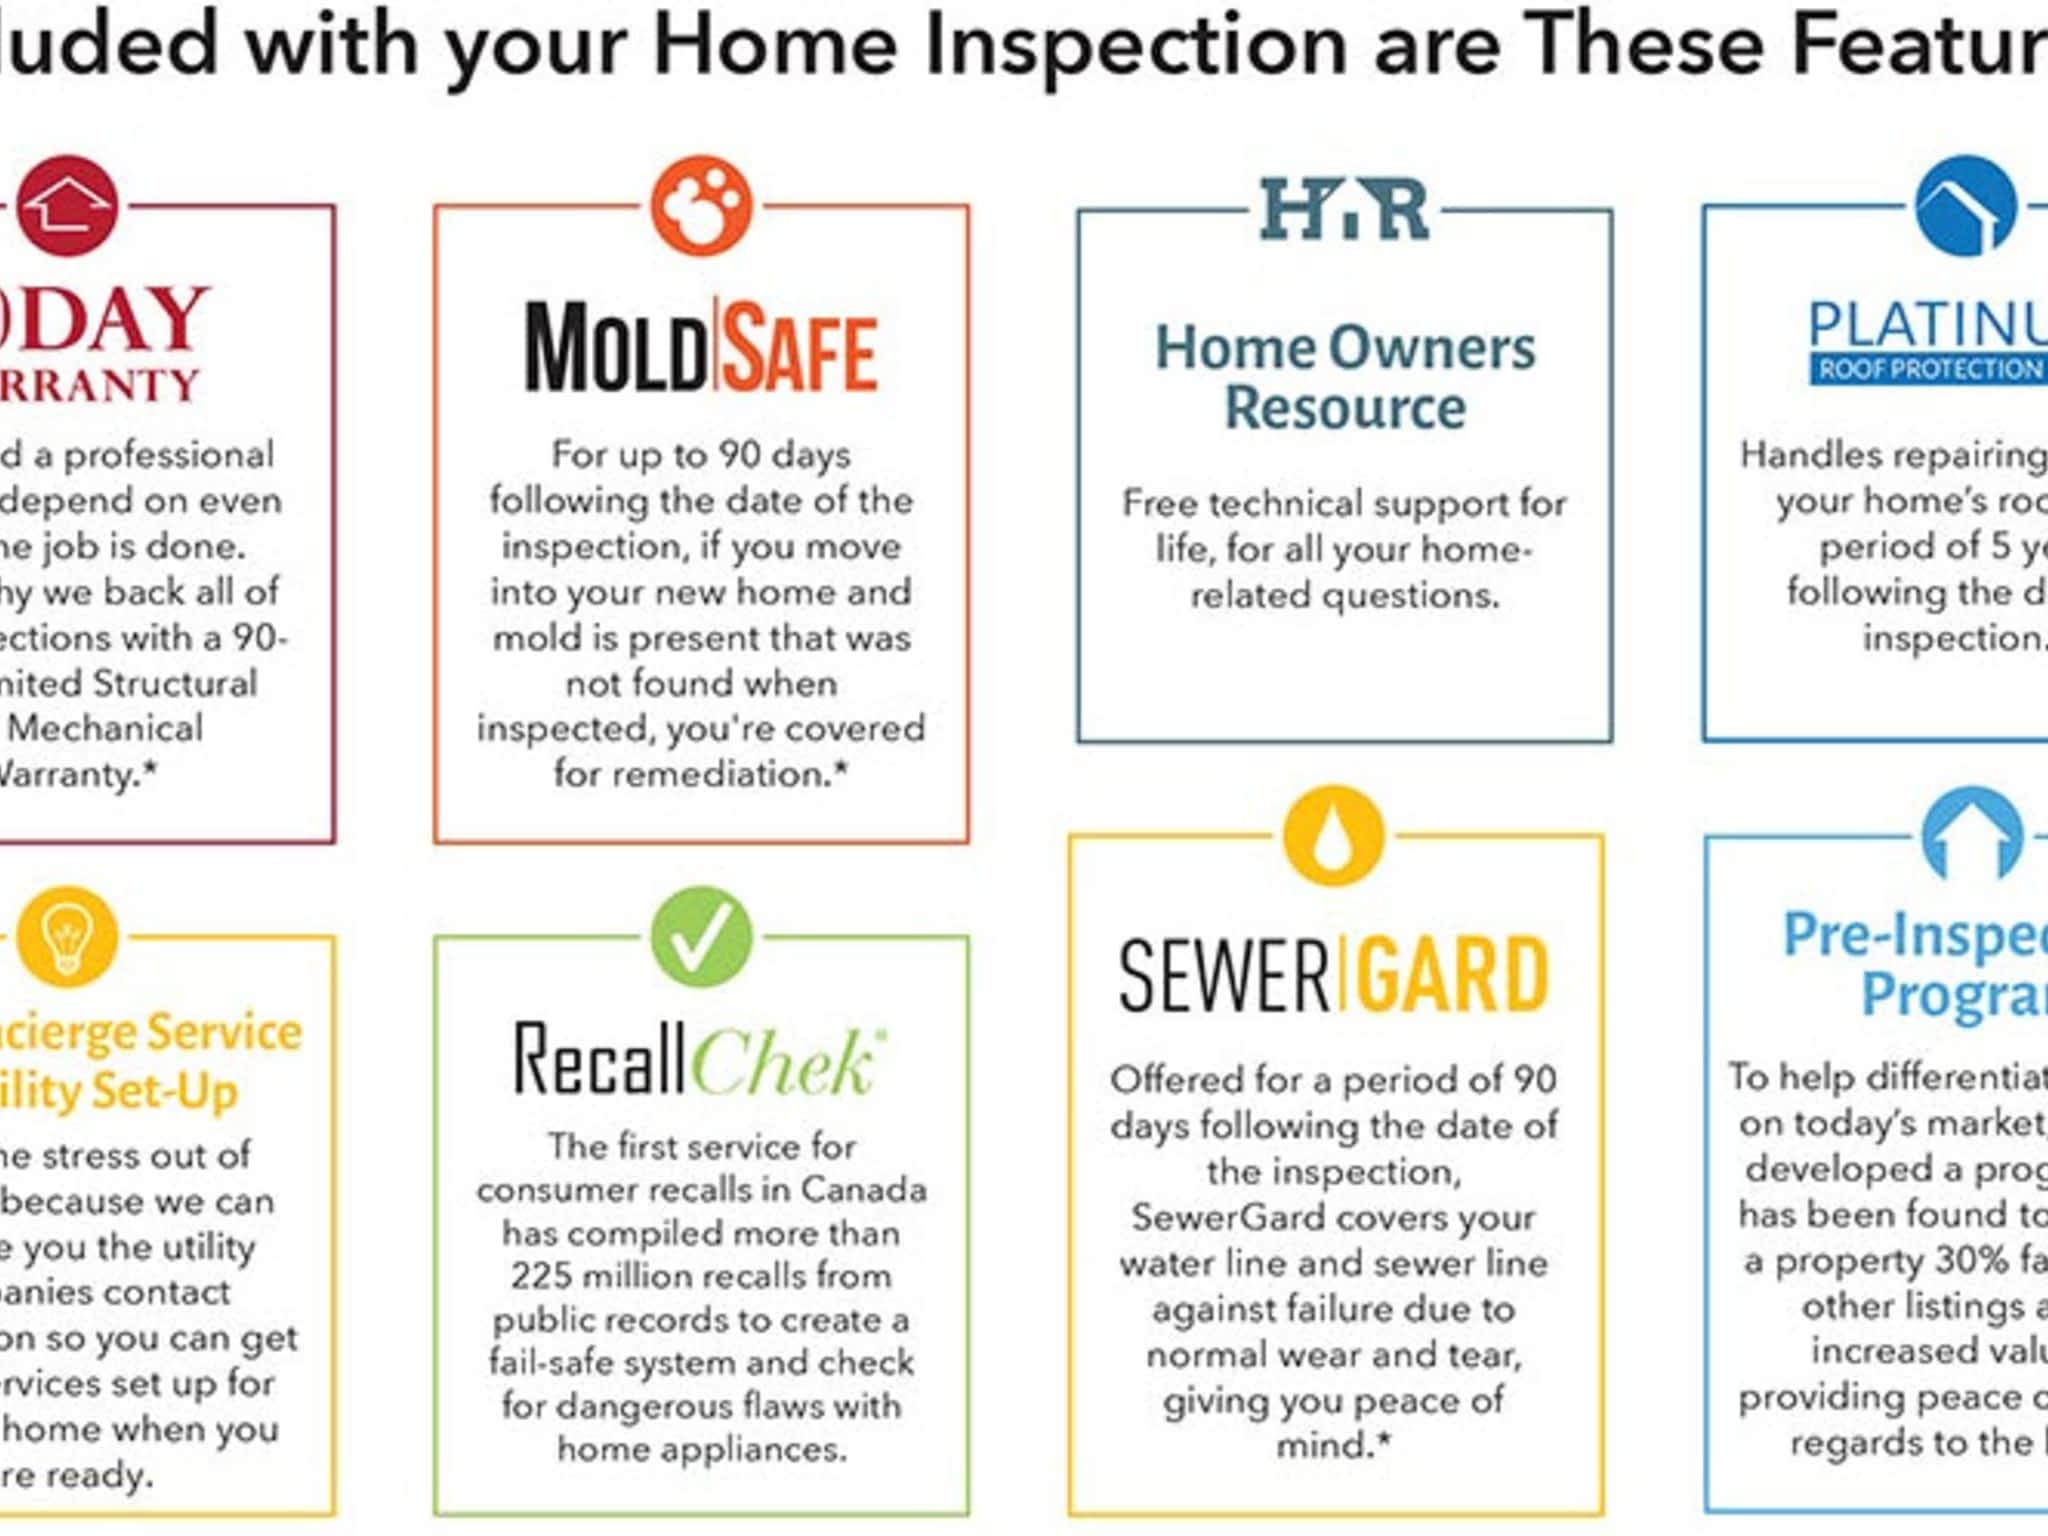 photo Barry Malesh - A Buyer's Choice Home Inspections